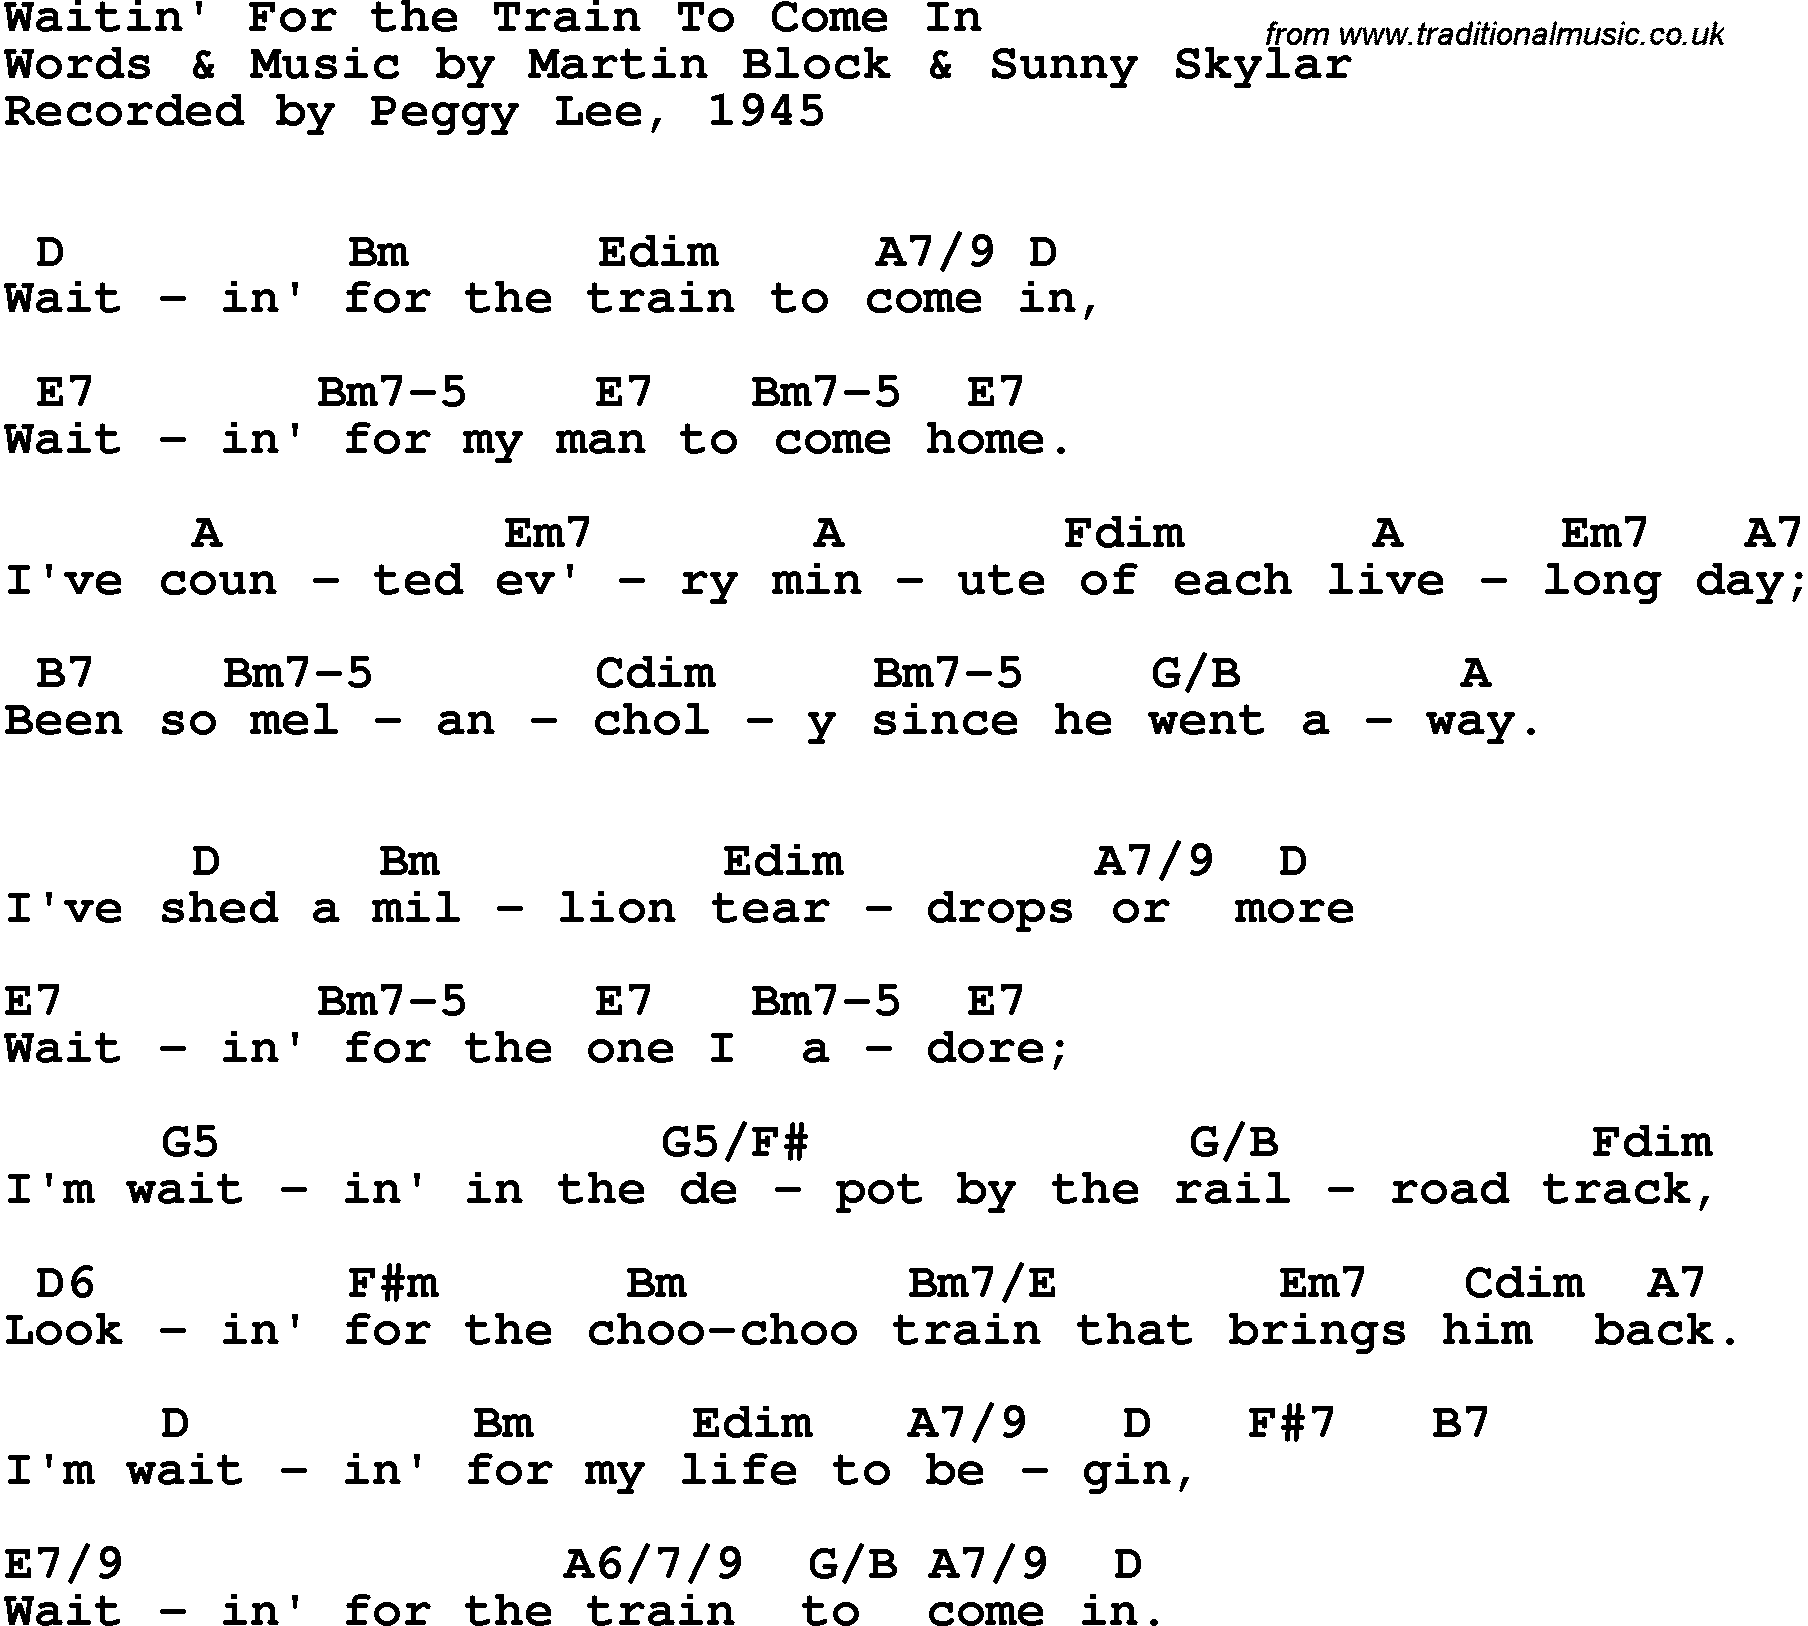 Song Lyrics with guitar chords for Waitin' For The Train To Come In - Peggy Lee, 1945